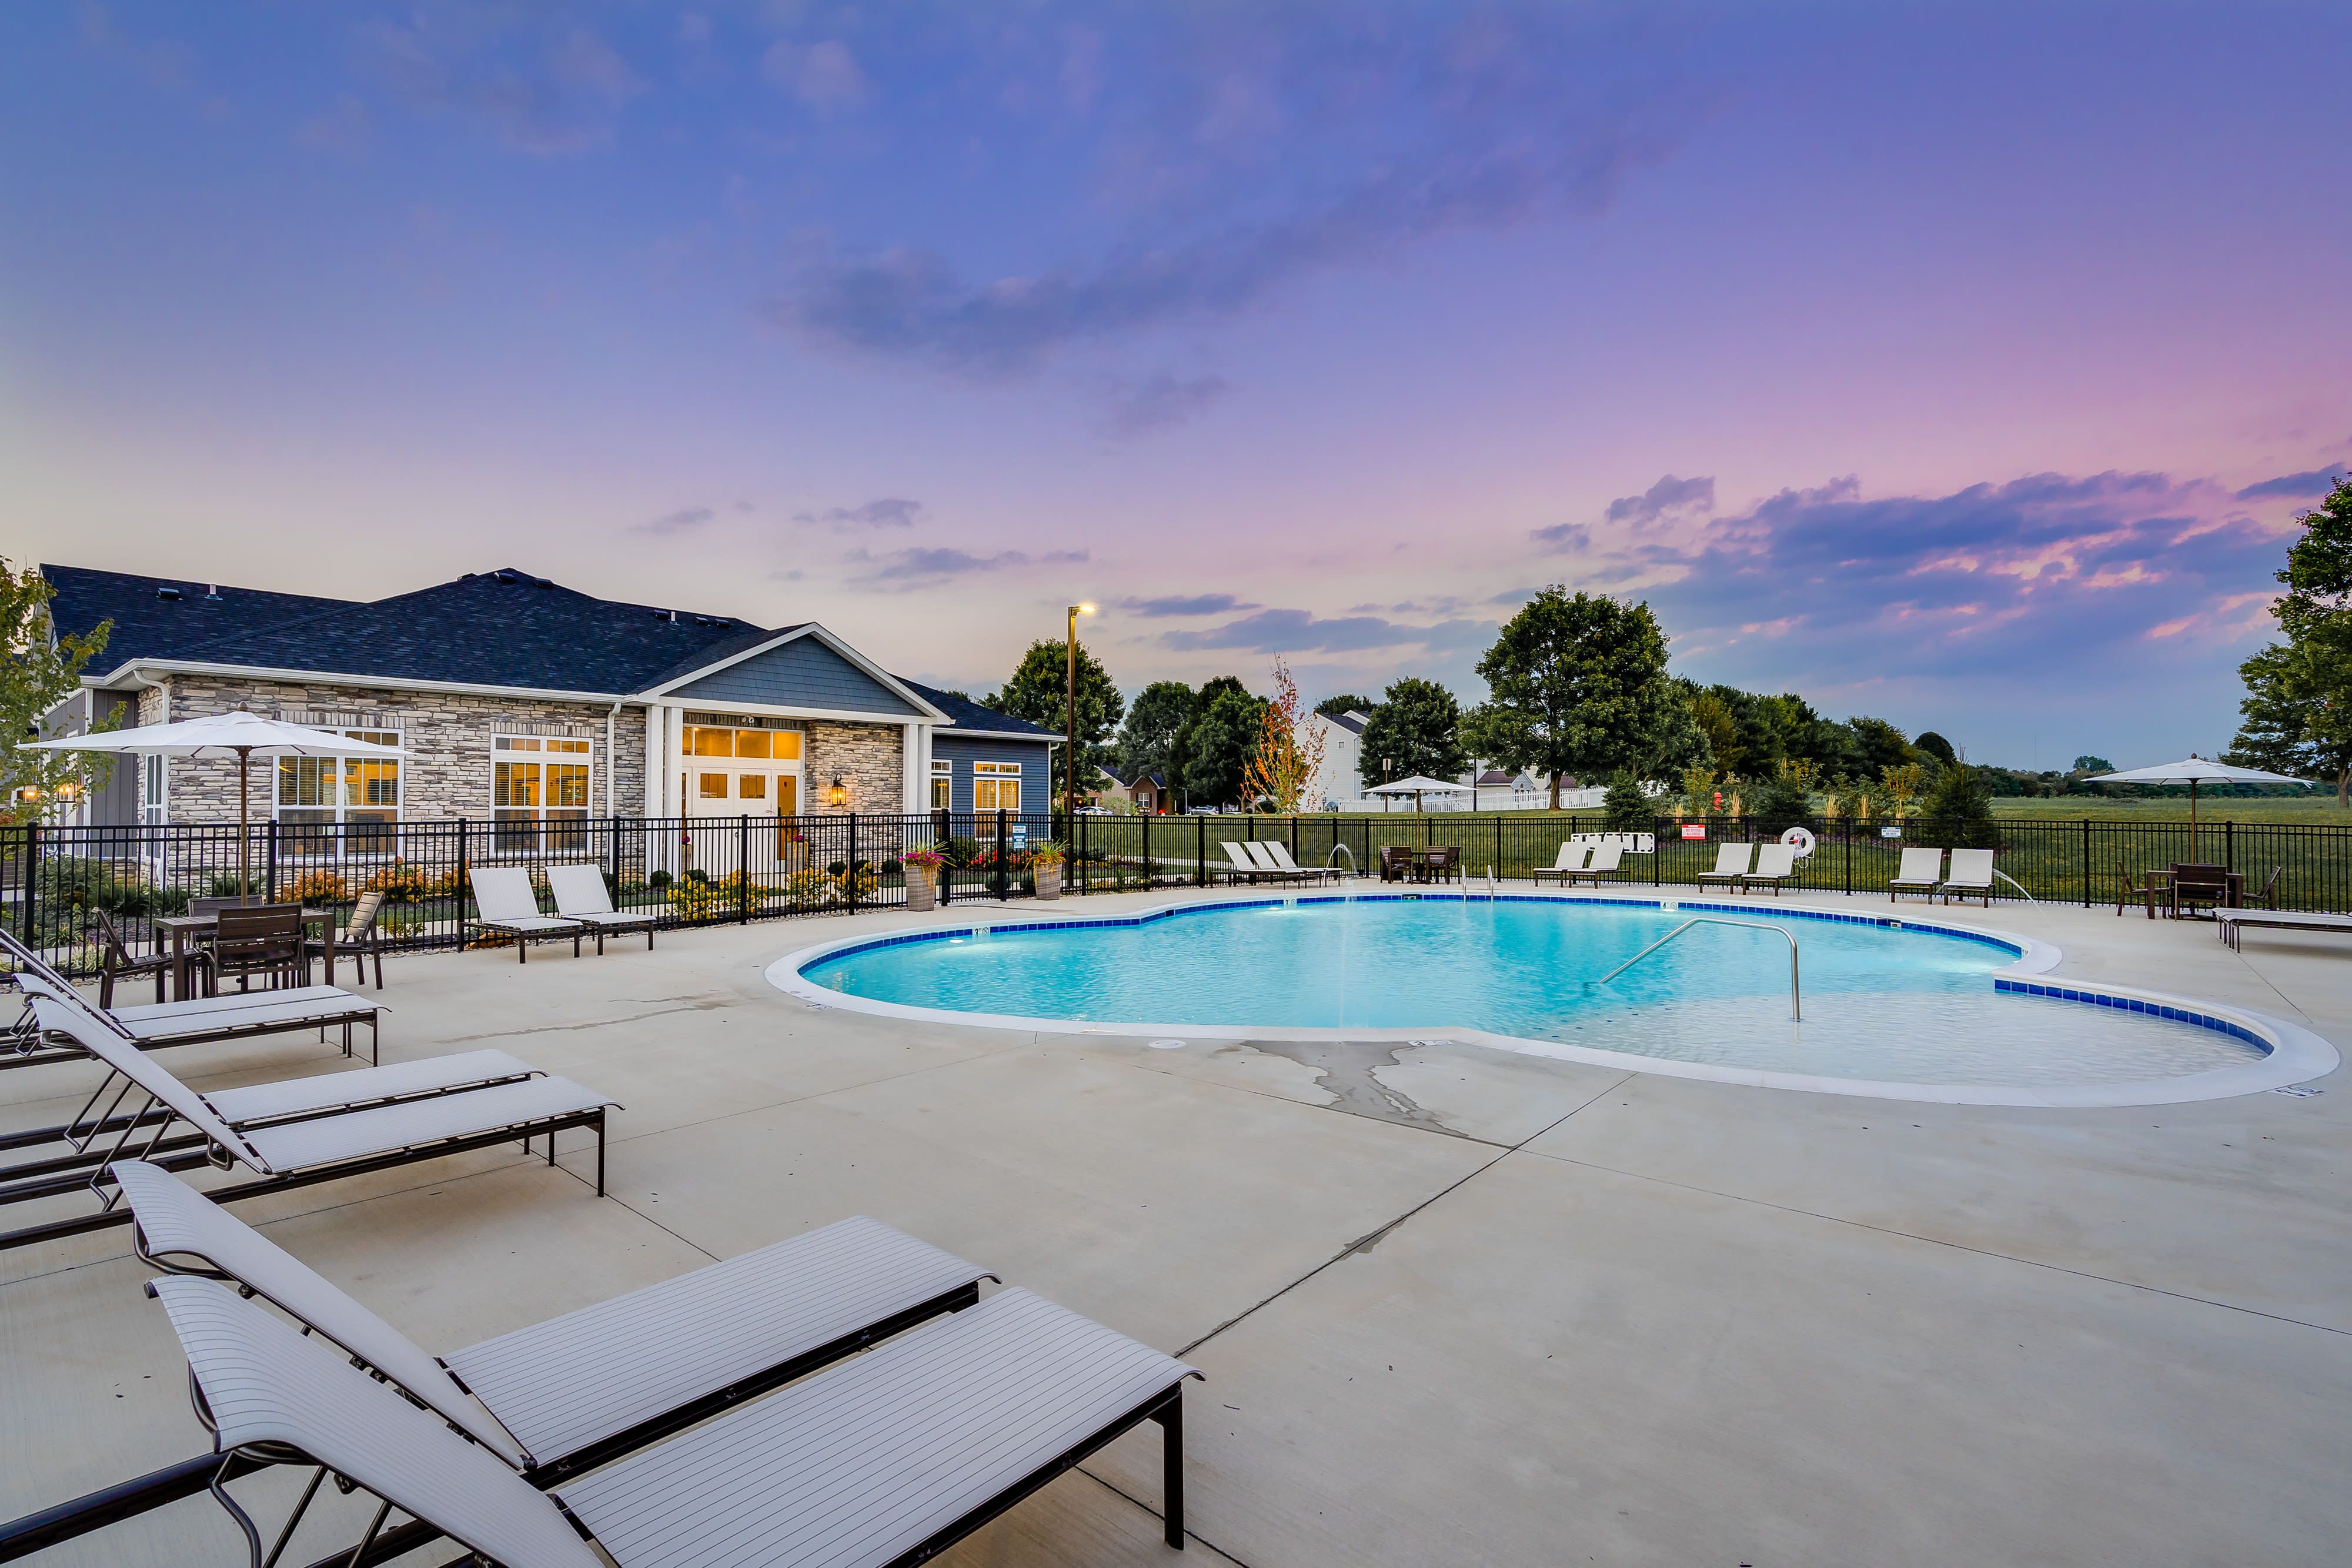 Swimming pool at Alexander Pointe Apartments in Maineville, Ohio